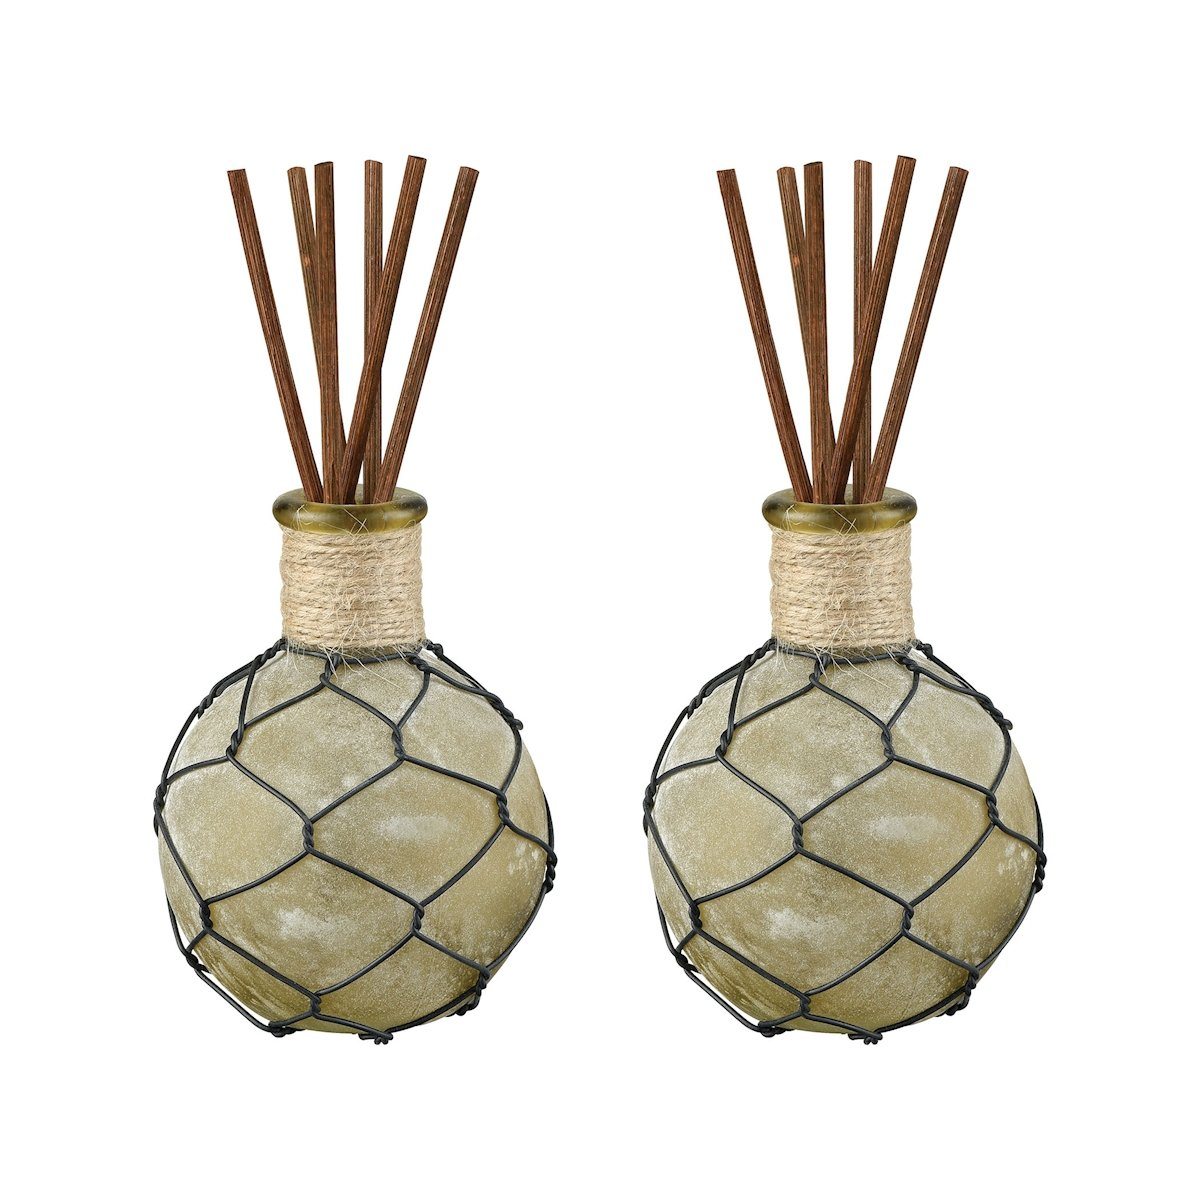 Farmhouse Set of 2 Reed Diffusers Round Accessories Pomeroy 